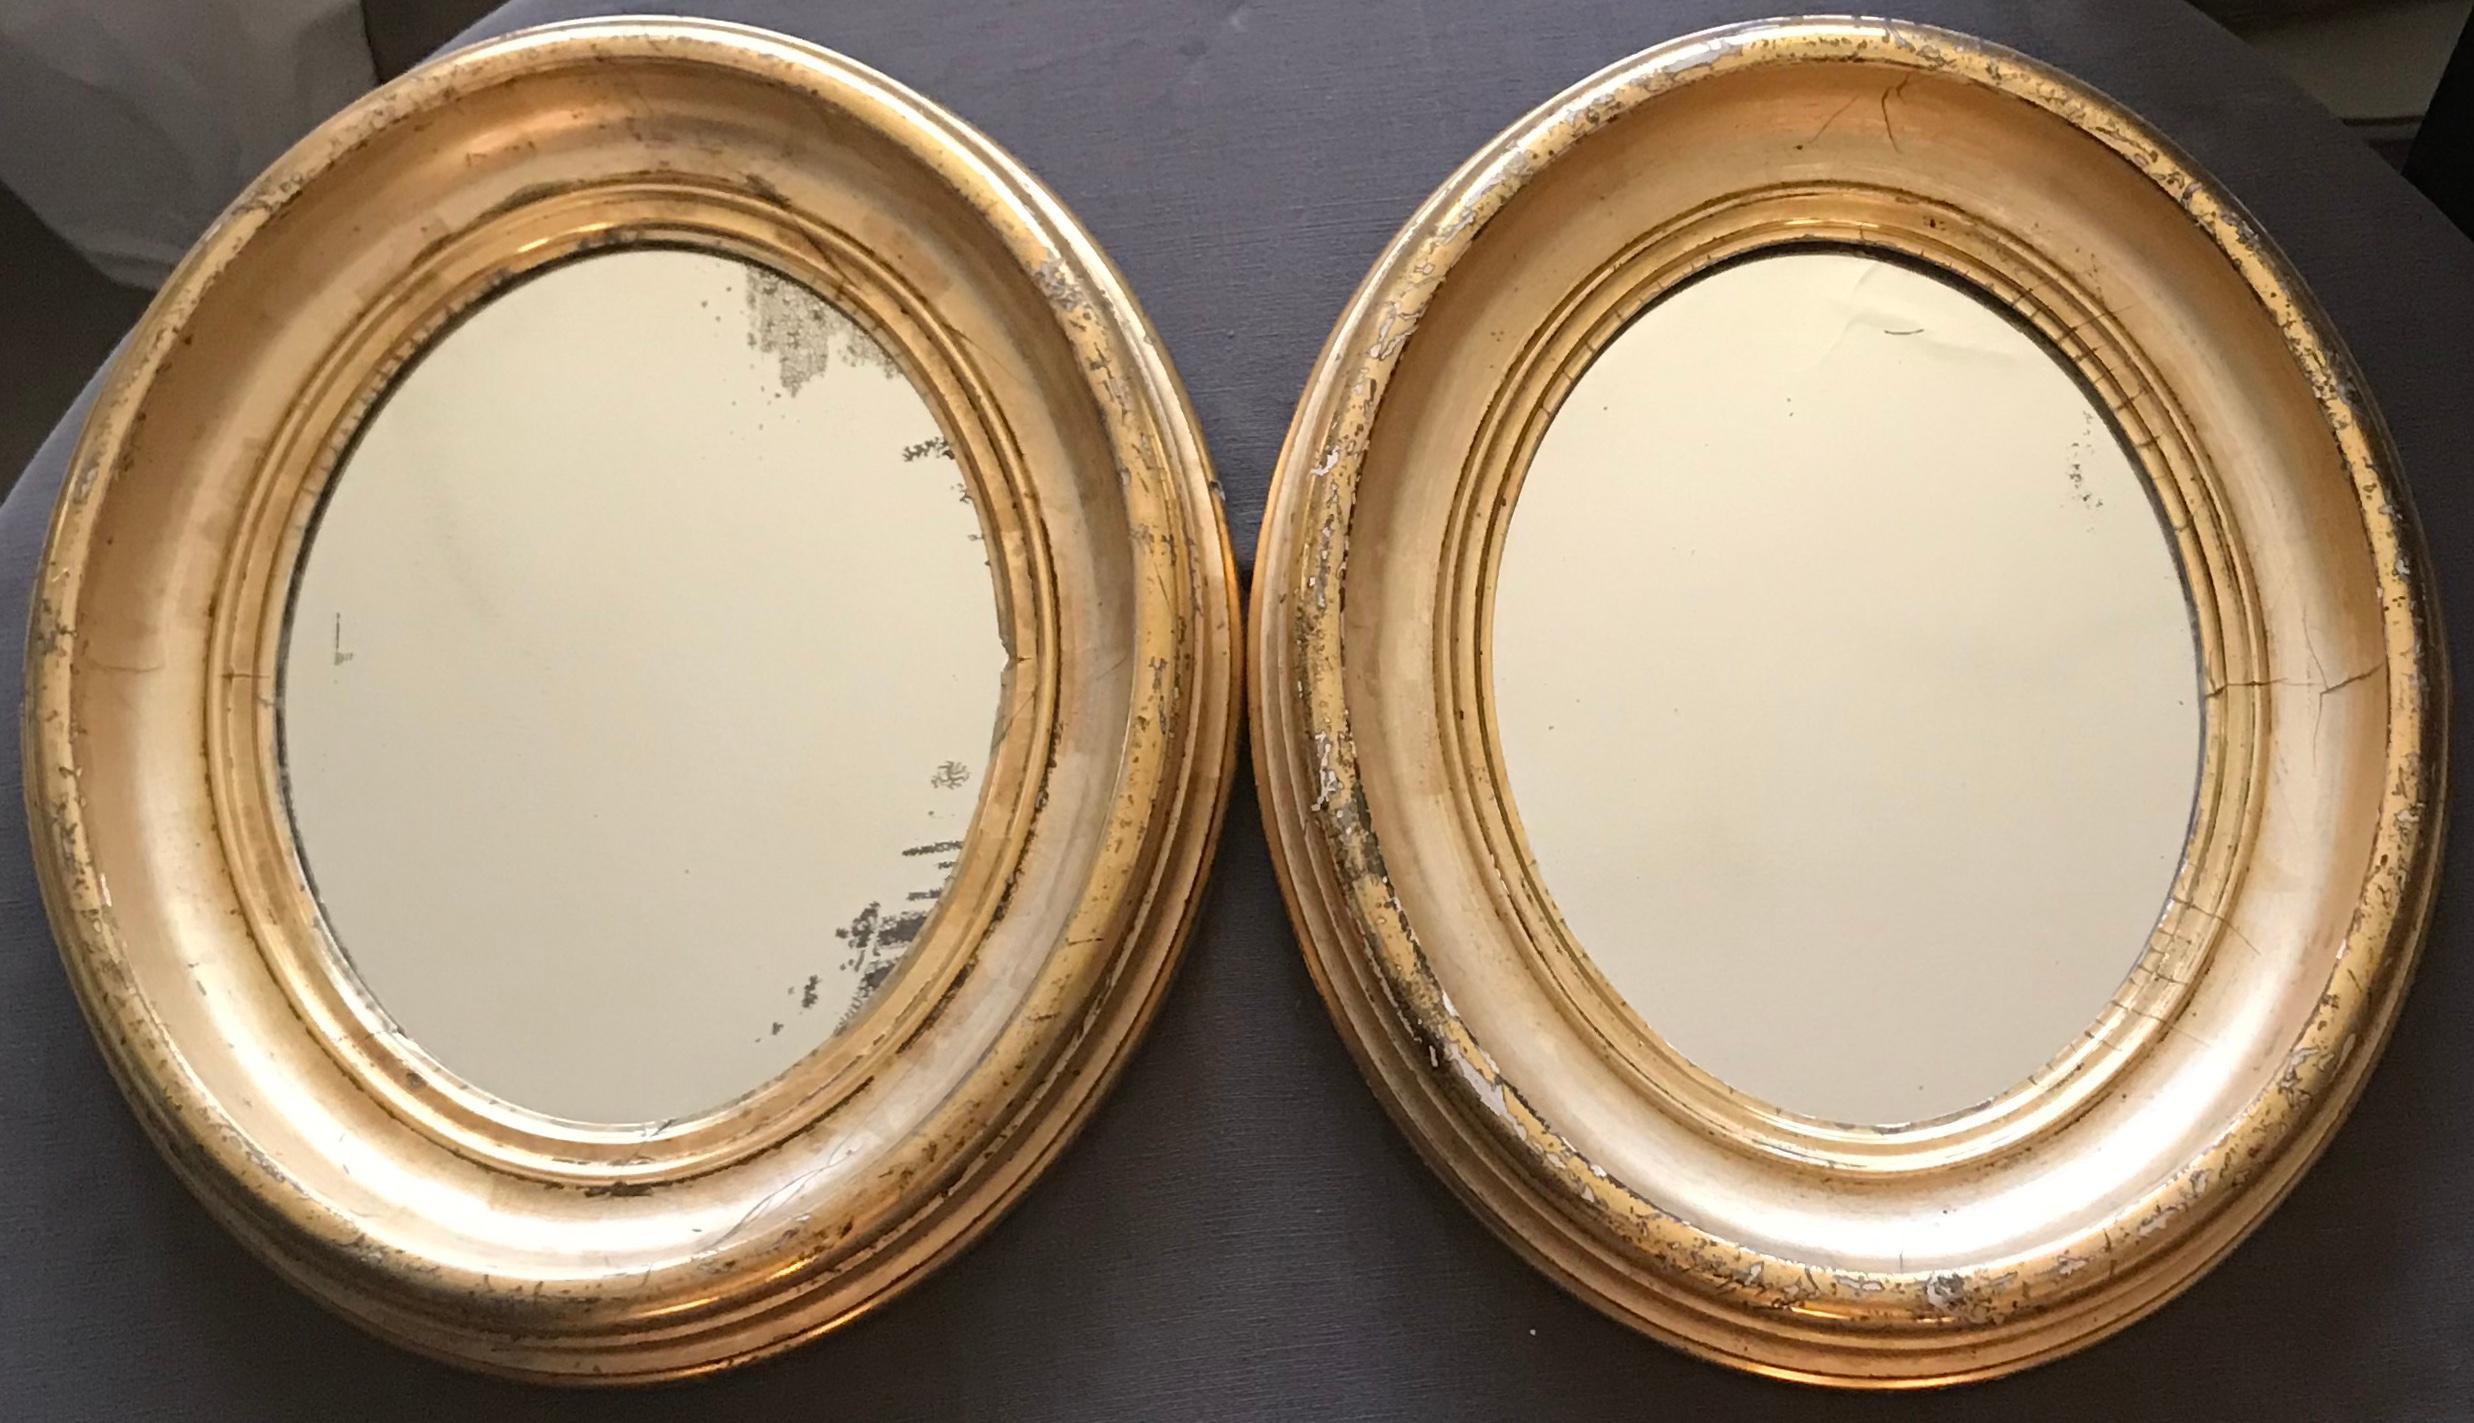 Pair of gilt oval mirrors. Richly coloured lemon gilt oval frames with original mirror plates from the American South. United States, circa 1840.
Dimensions: 14.5